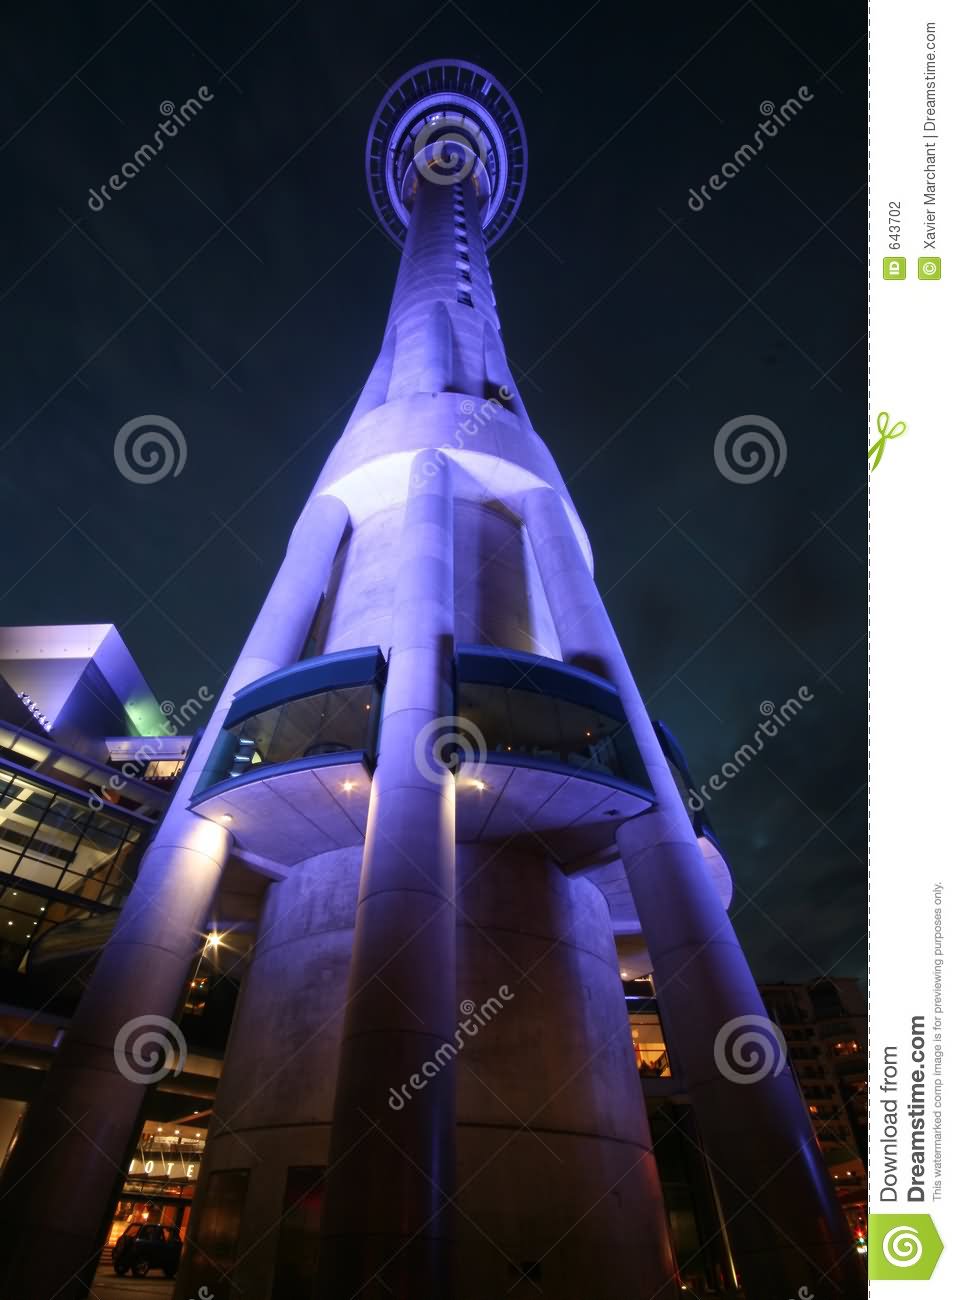 Sky Tower View From Below At Night